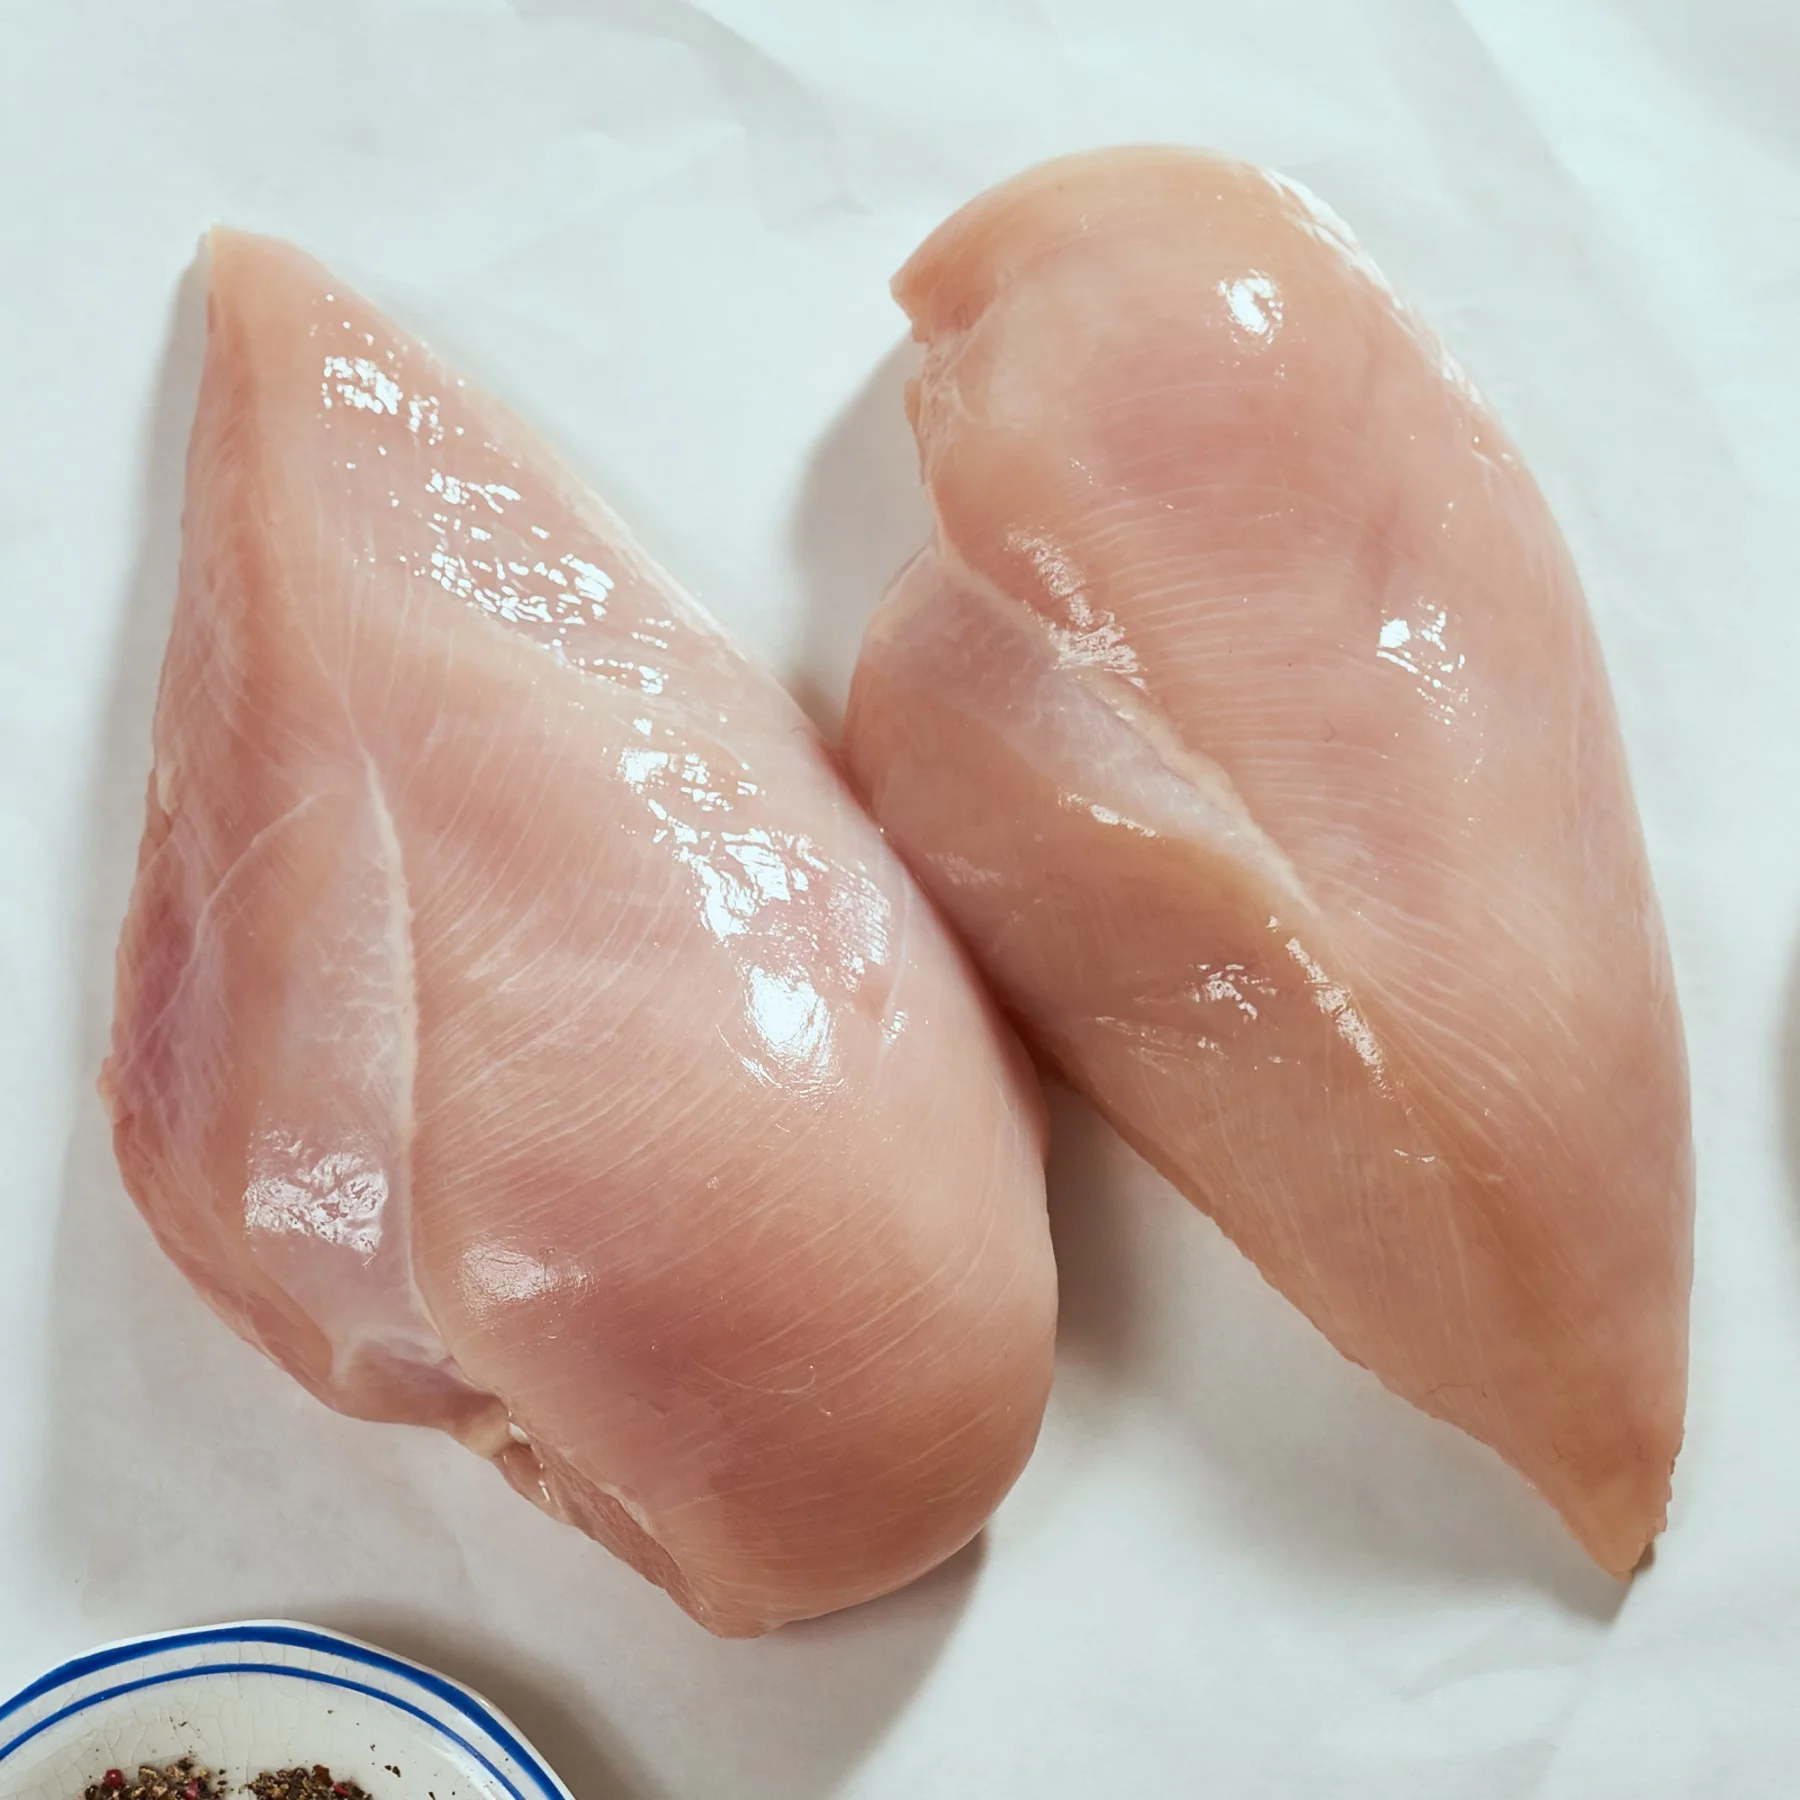 FROZEN CHICKEN BREAST AND ITS IMPORTANCE